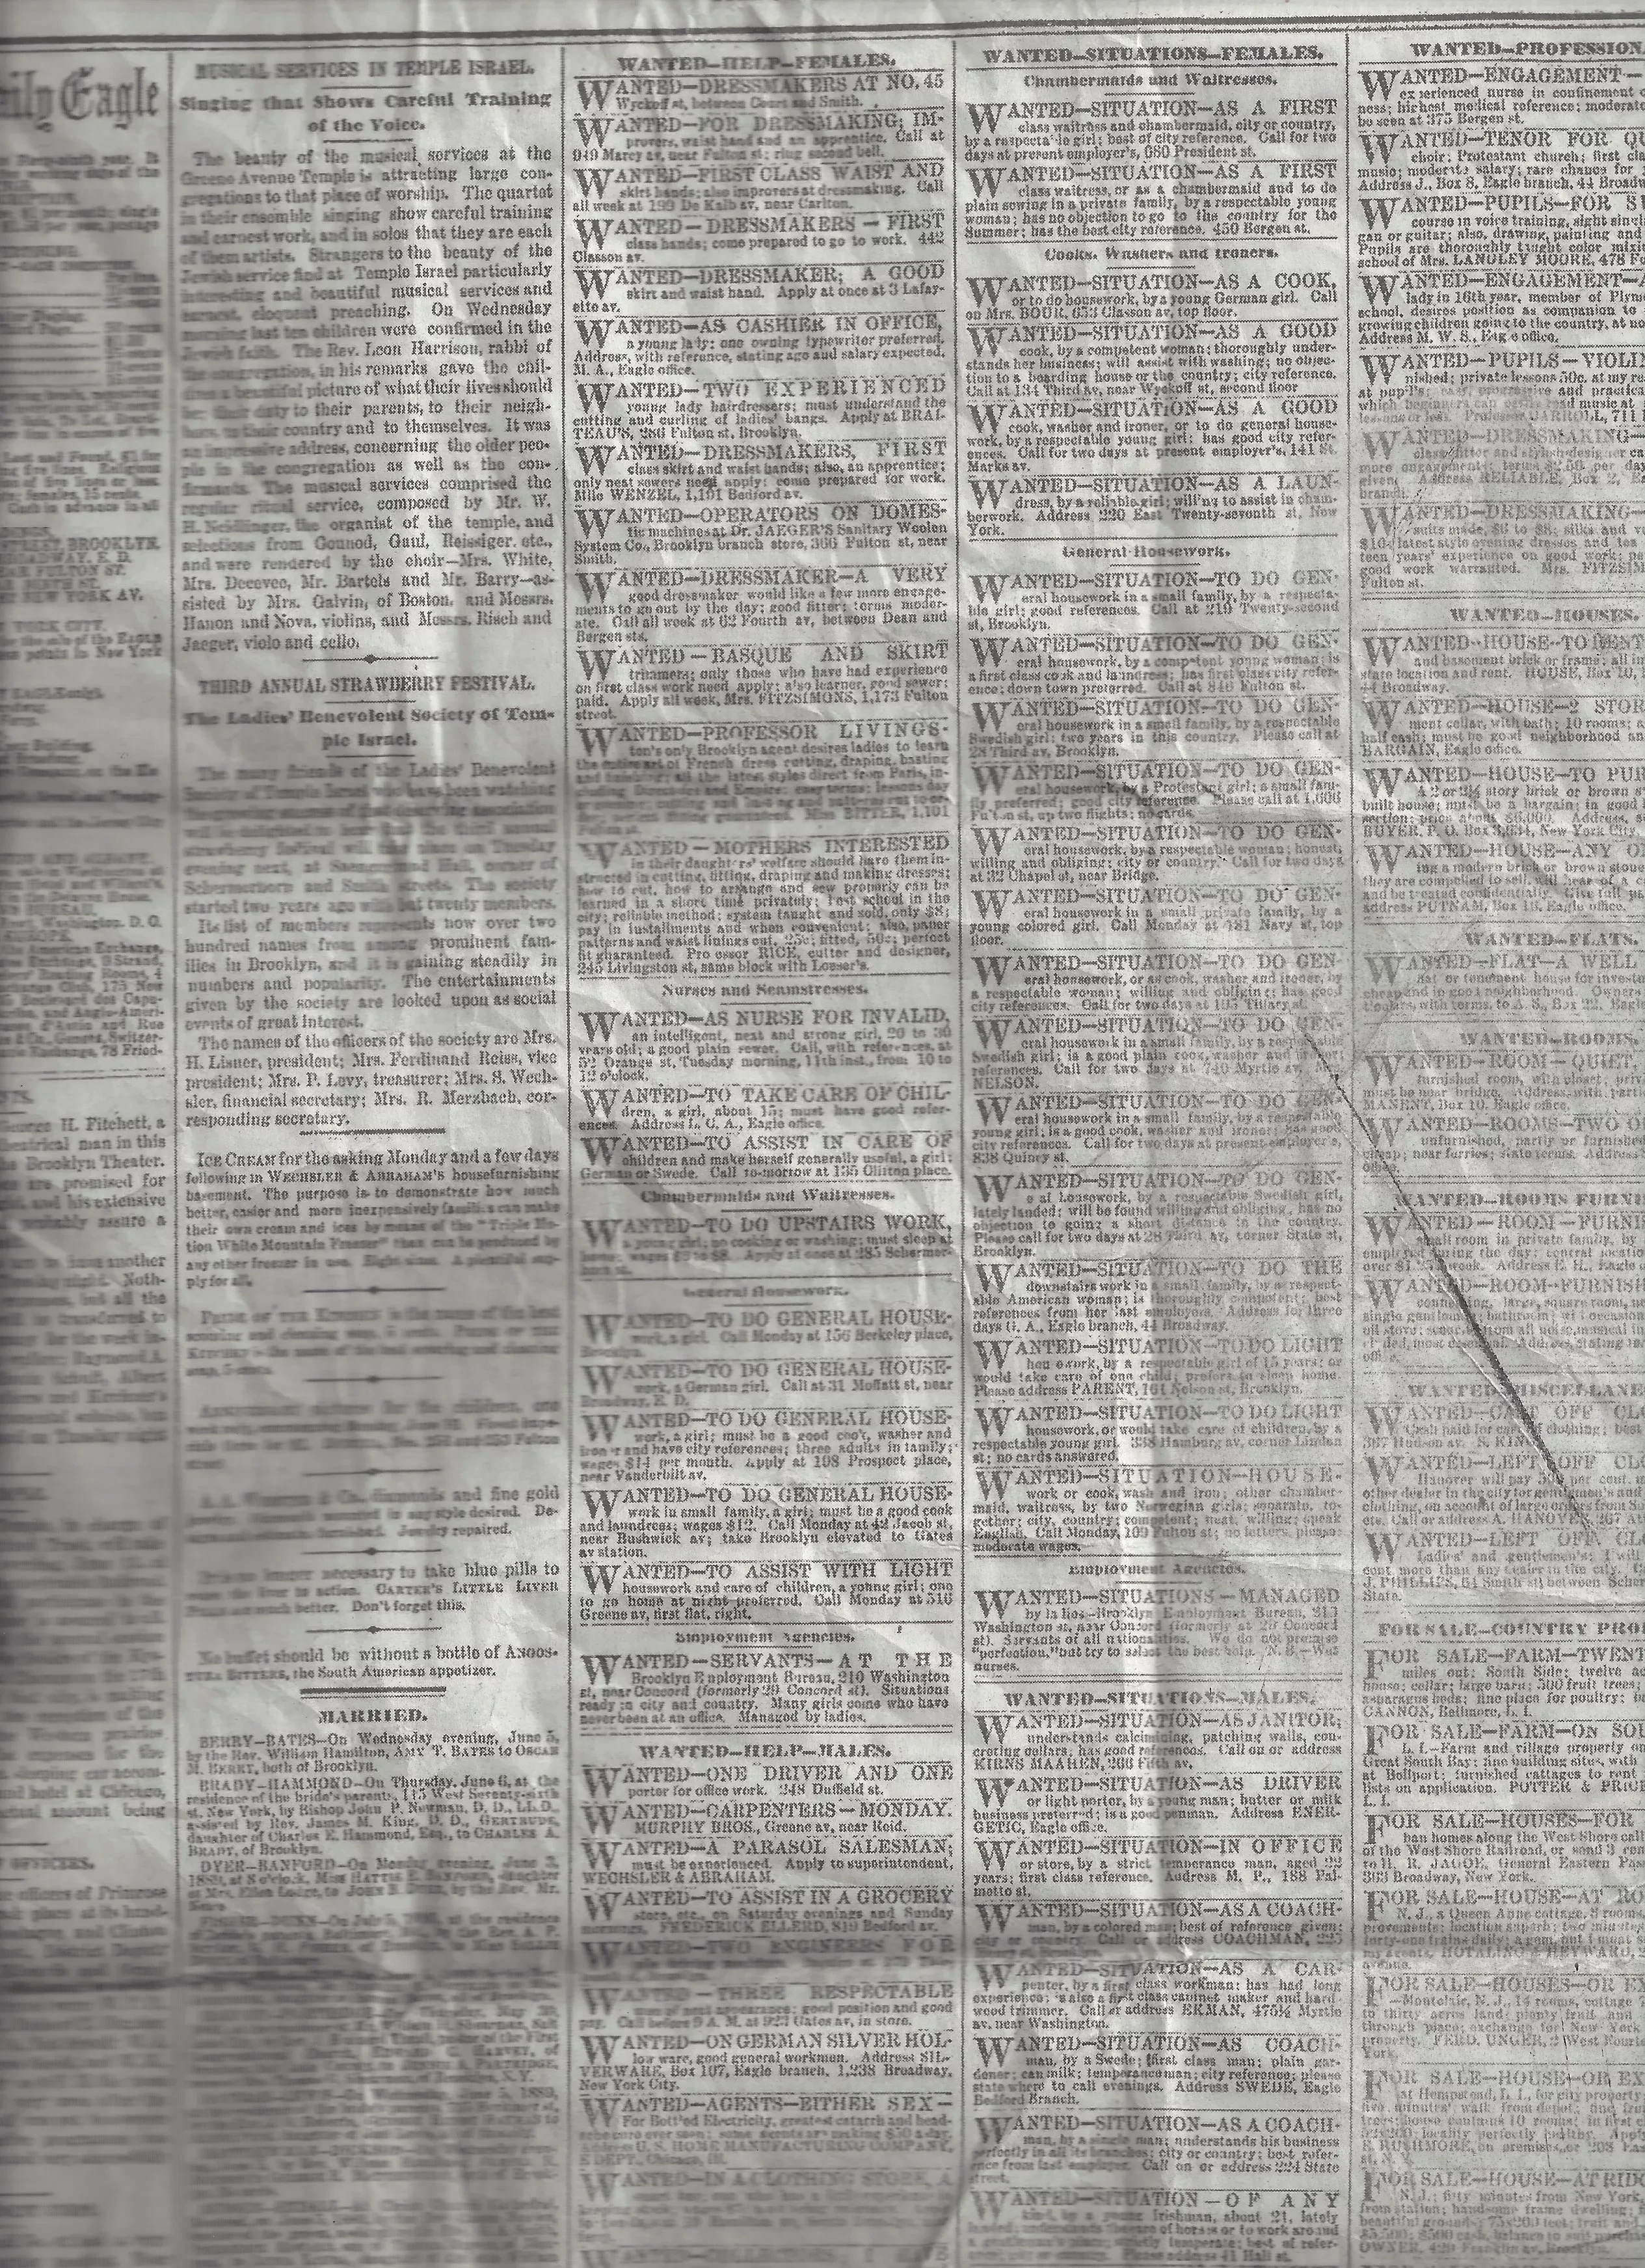 Page from the New York World dated July 20, 1899